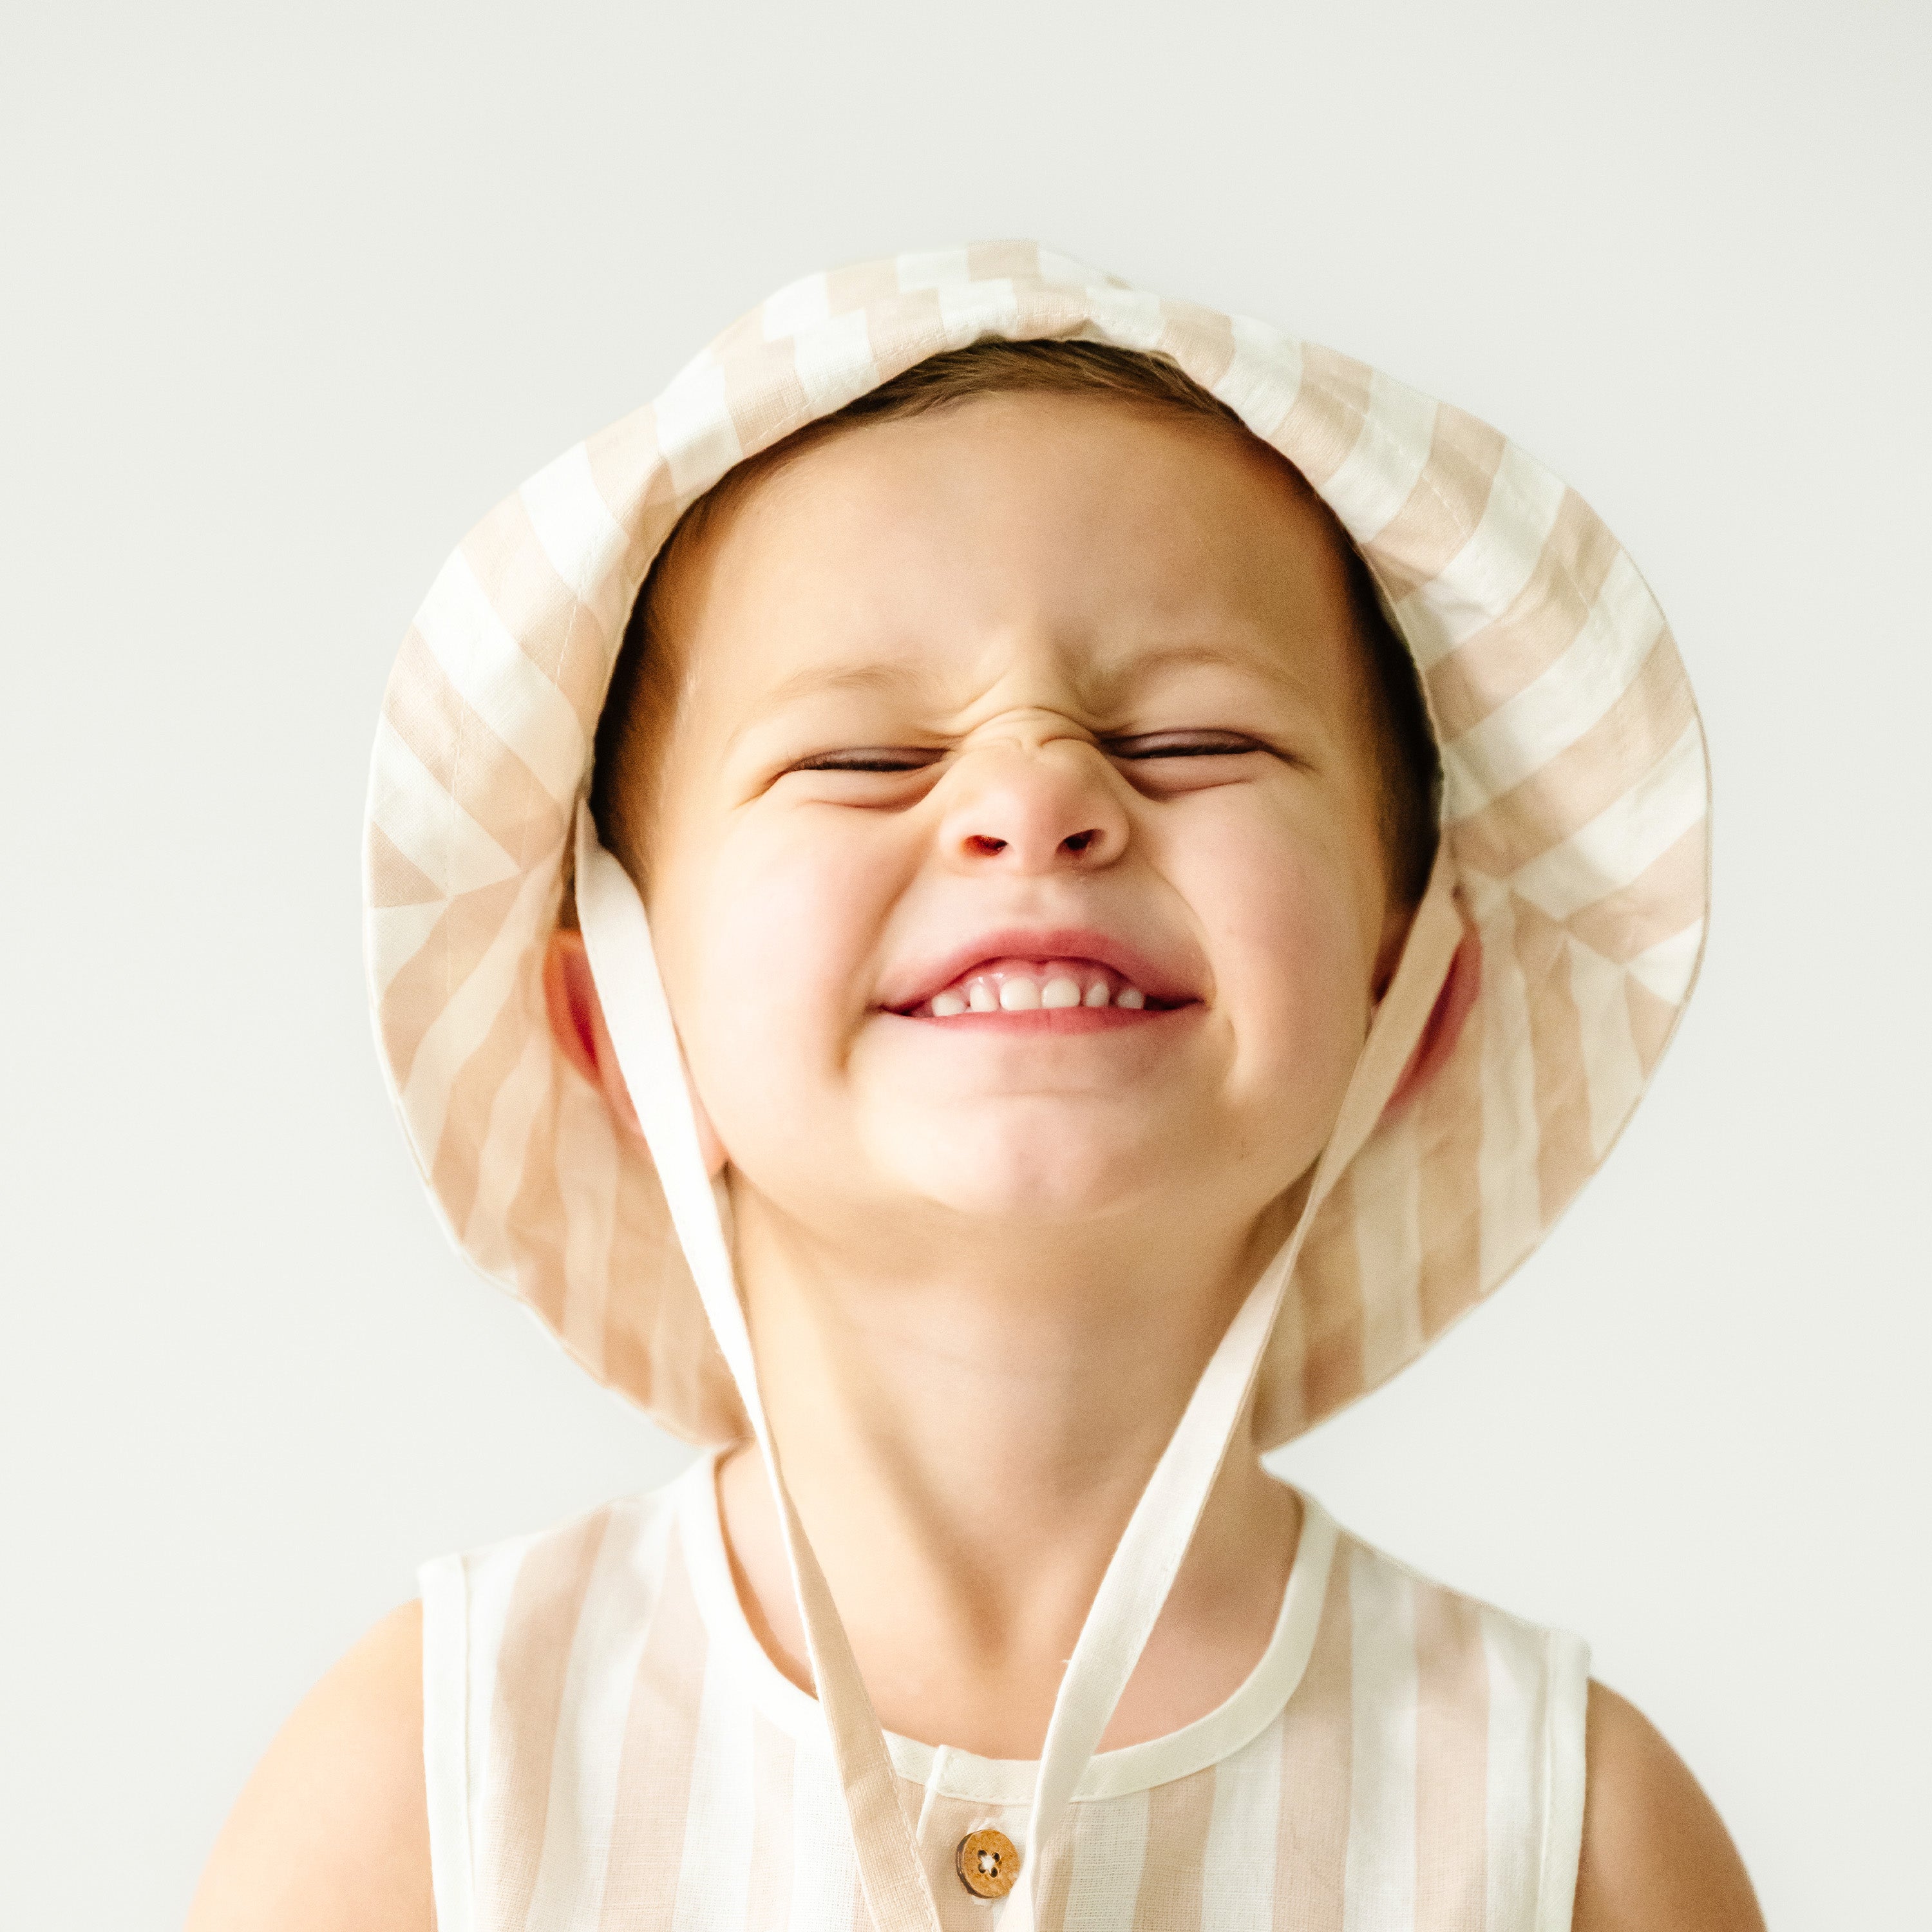 A cheerful young toddler with a wide, squinting smile, wearing a Makemake Organics Organic Linen Bucket Sun Hat in Beige Stripes and a sleeveless top against a plain background.